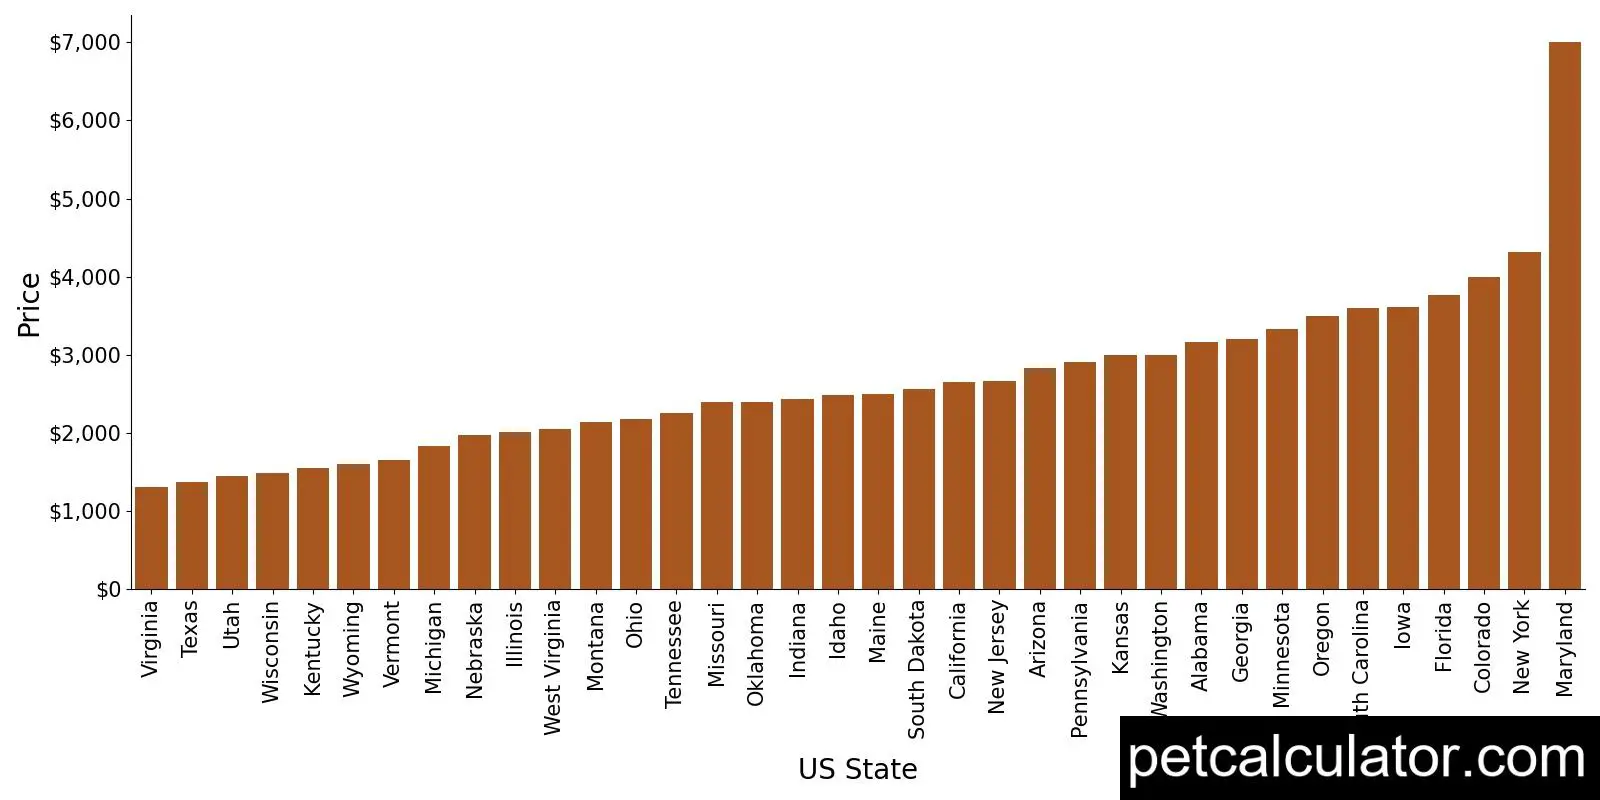 Price of Bernese Mountain Dog by US State 